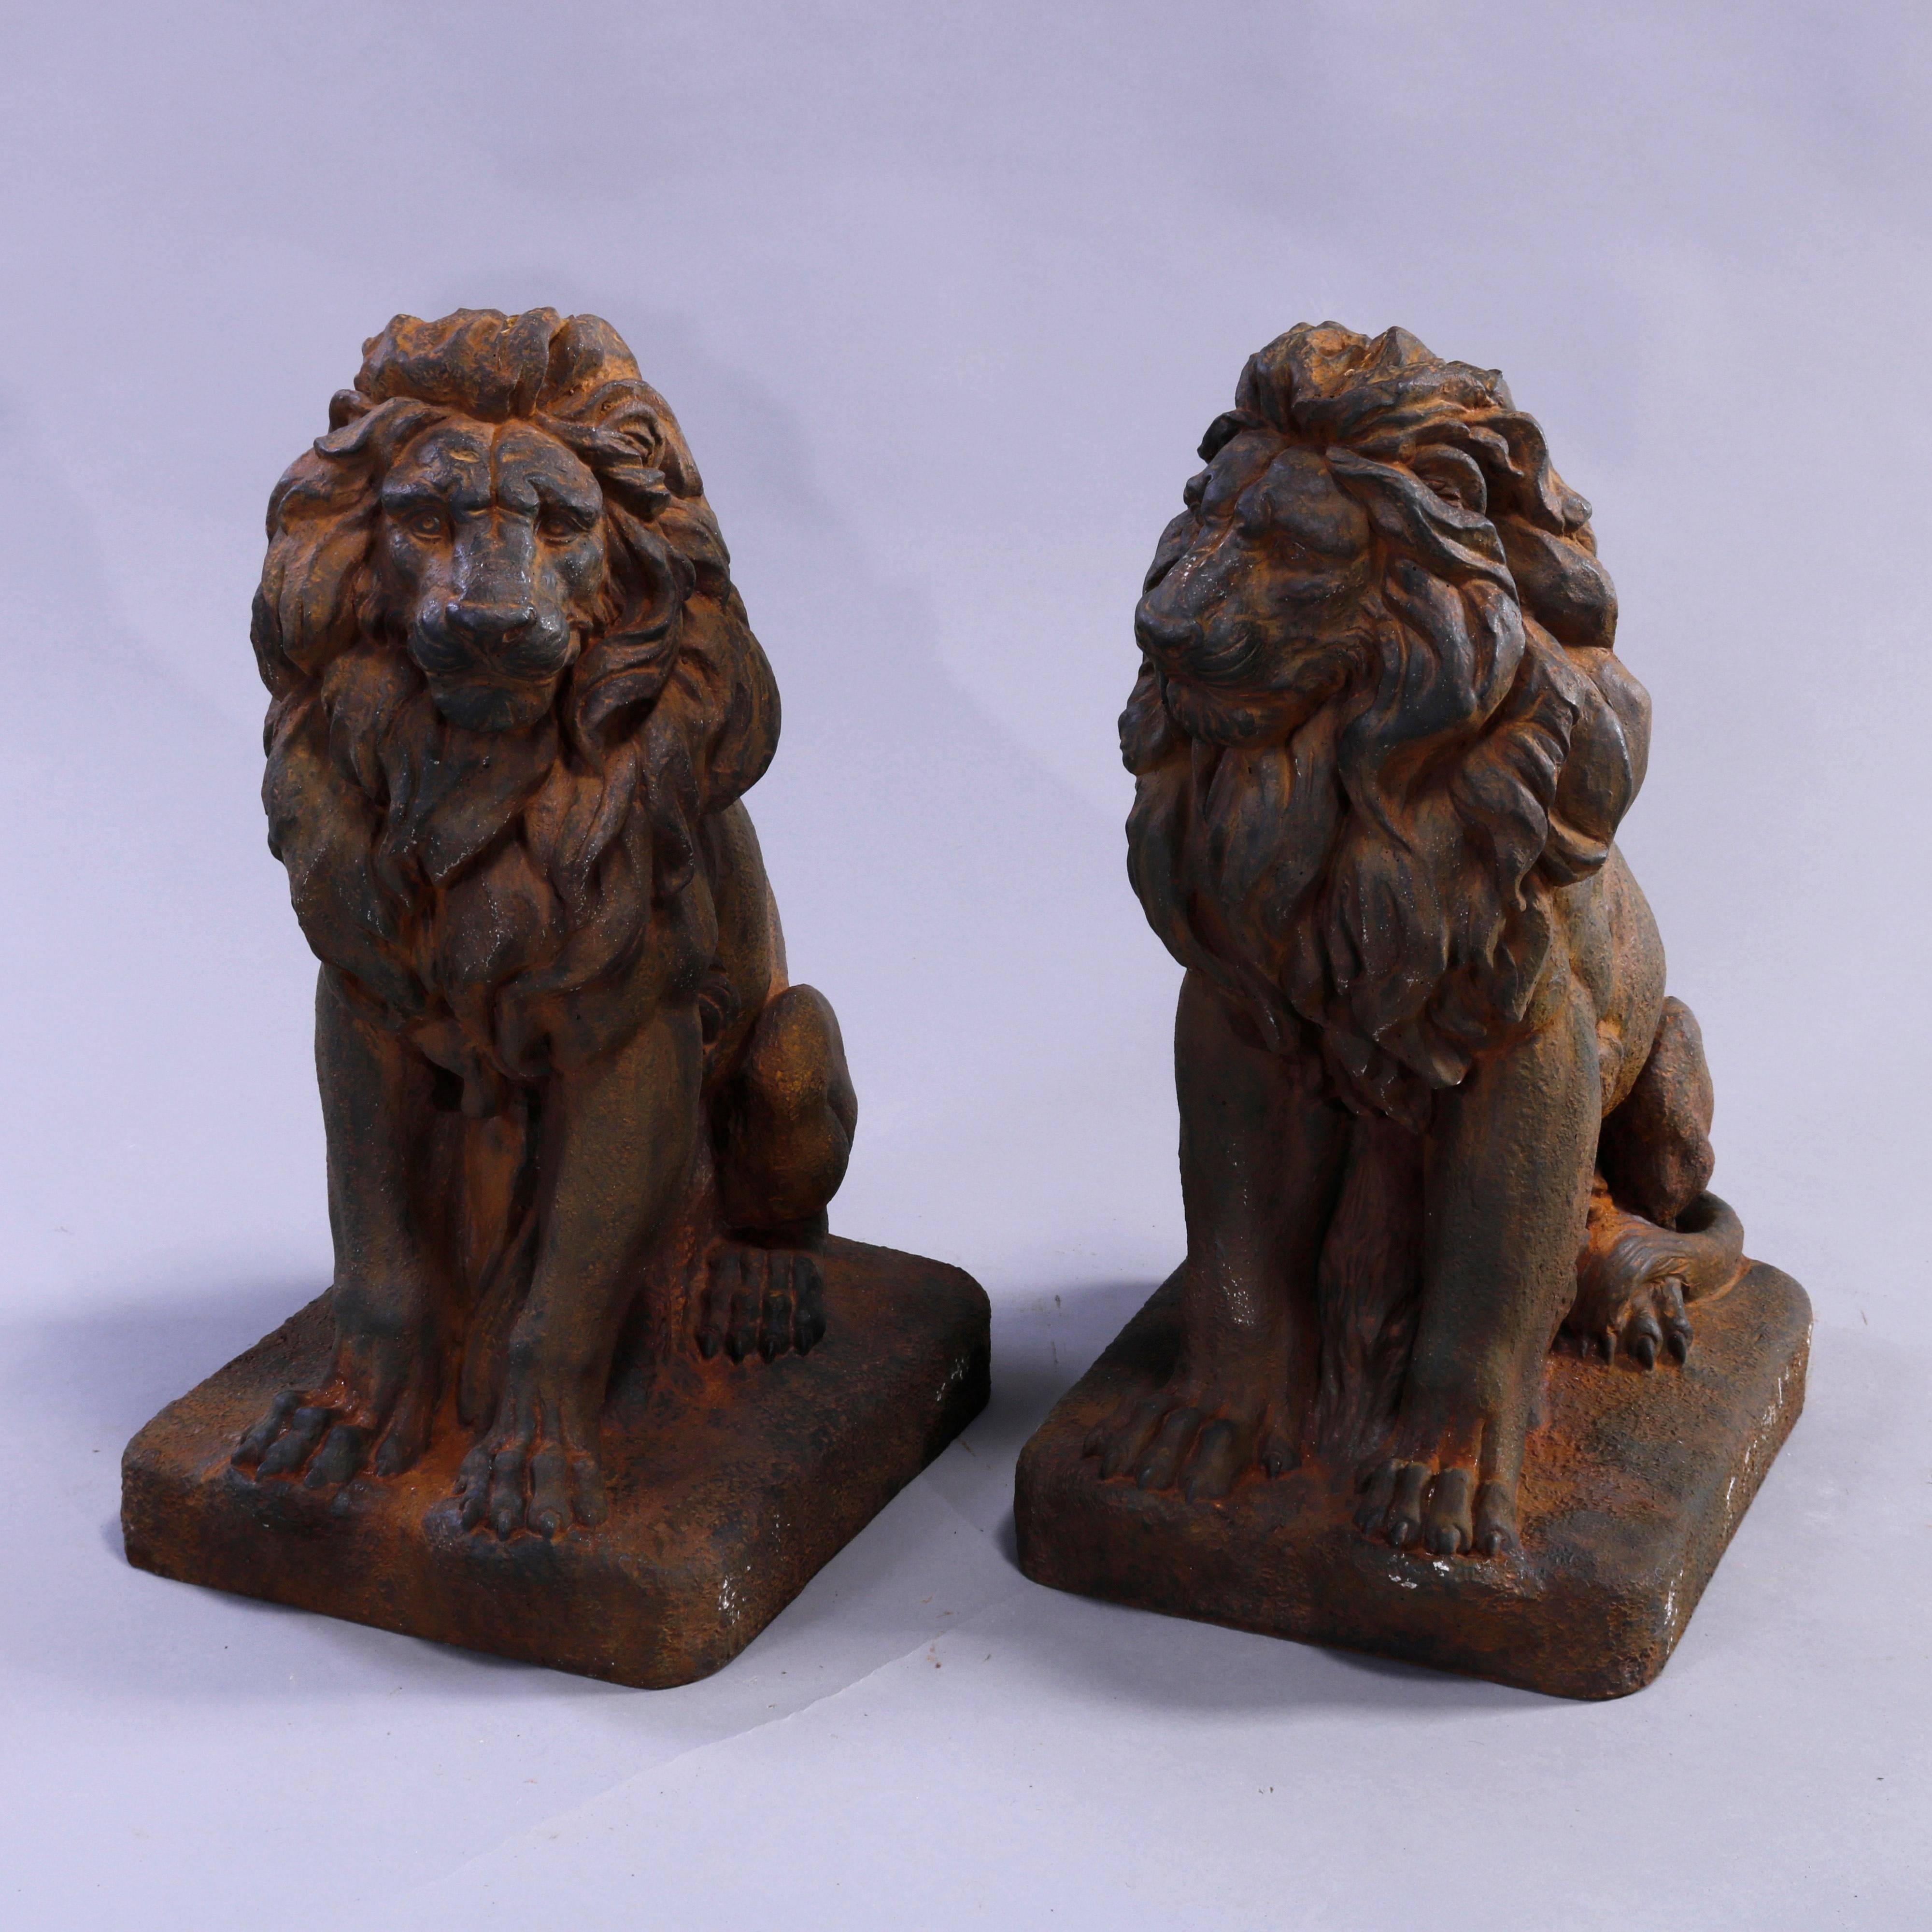 A pair of figural garden sculptures offer bronzed cast hard stone Classical lions in the seated position, 20th century.

Measures - 21.5